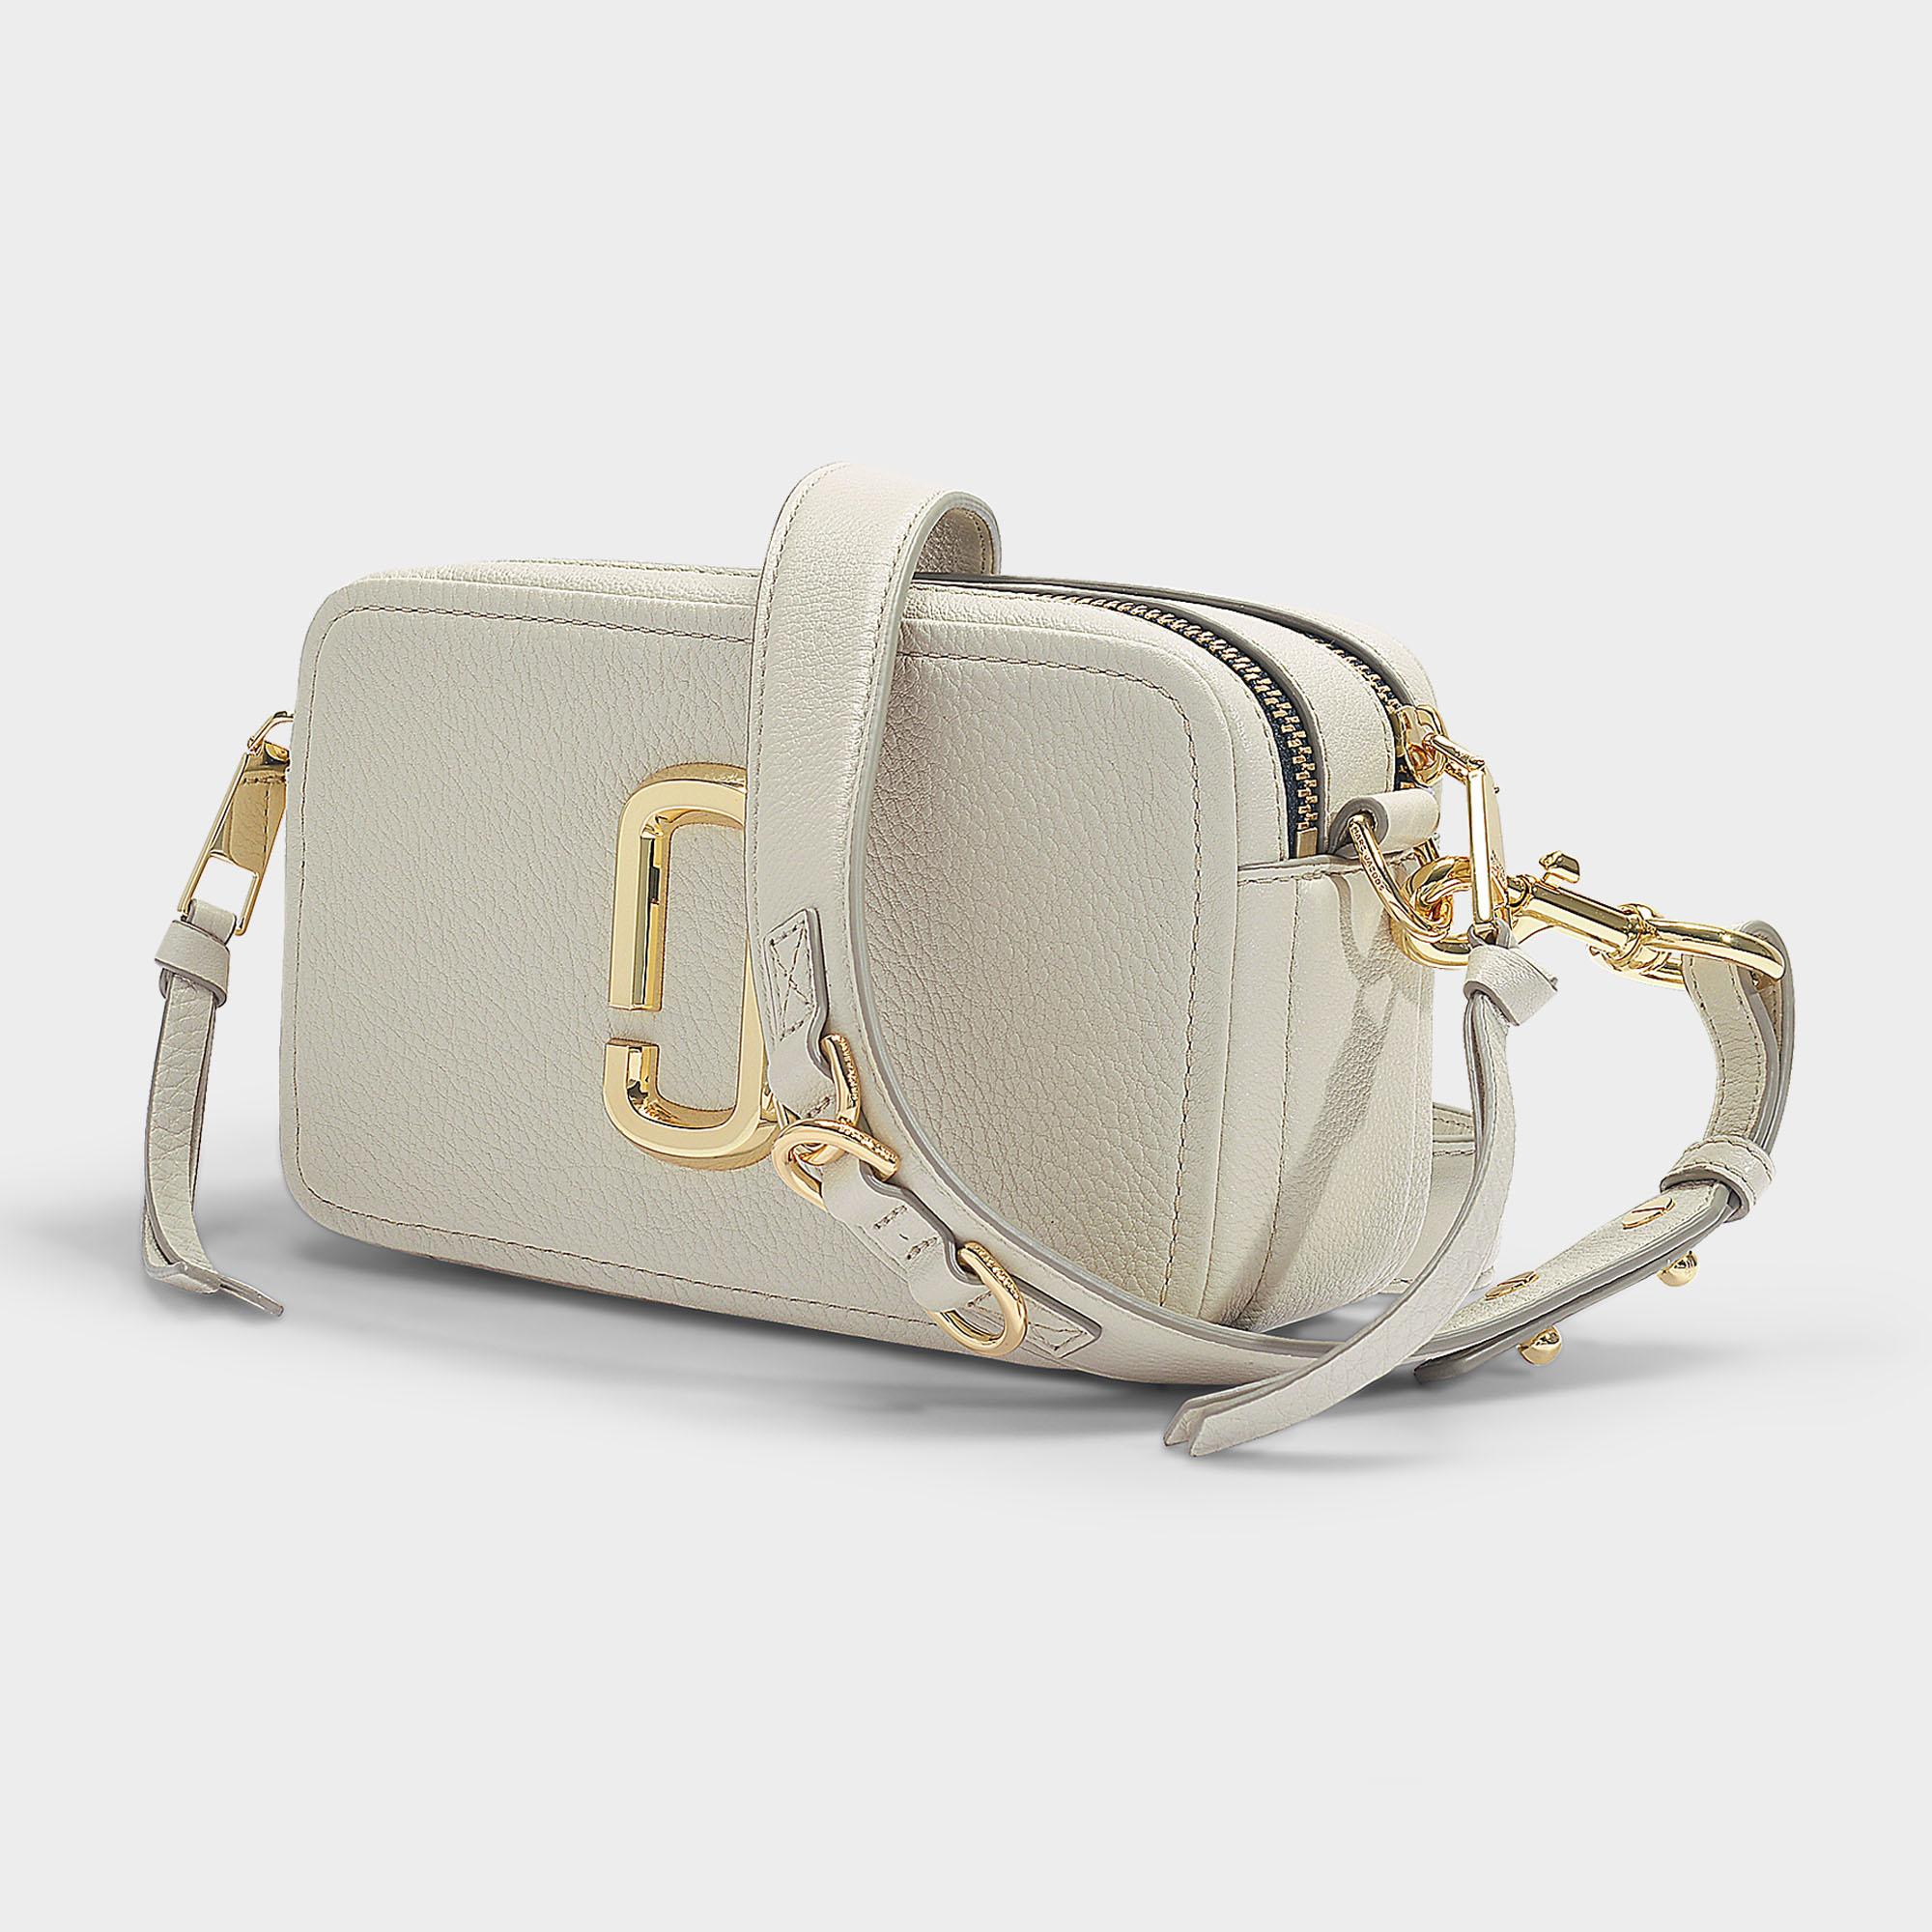 MARC JACOBS THE SOFTSHOT 21 PEBBLED CREAM LEATHER CROSSBODY-EXCELLENT COND